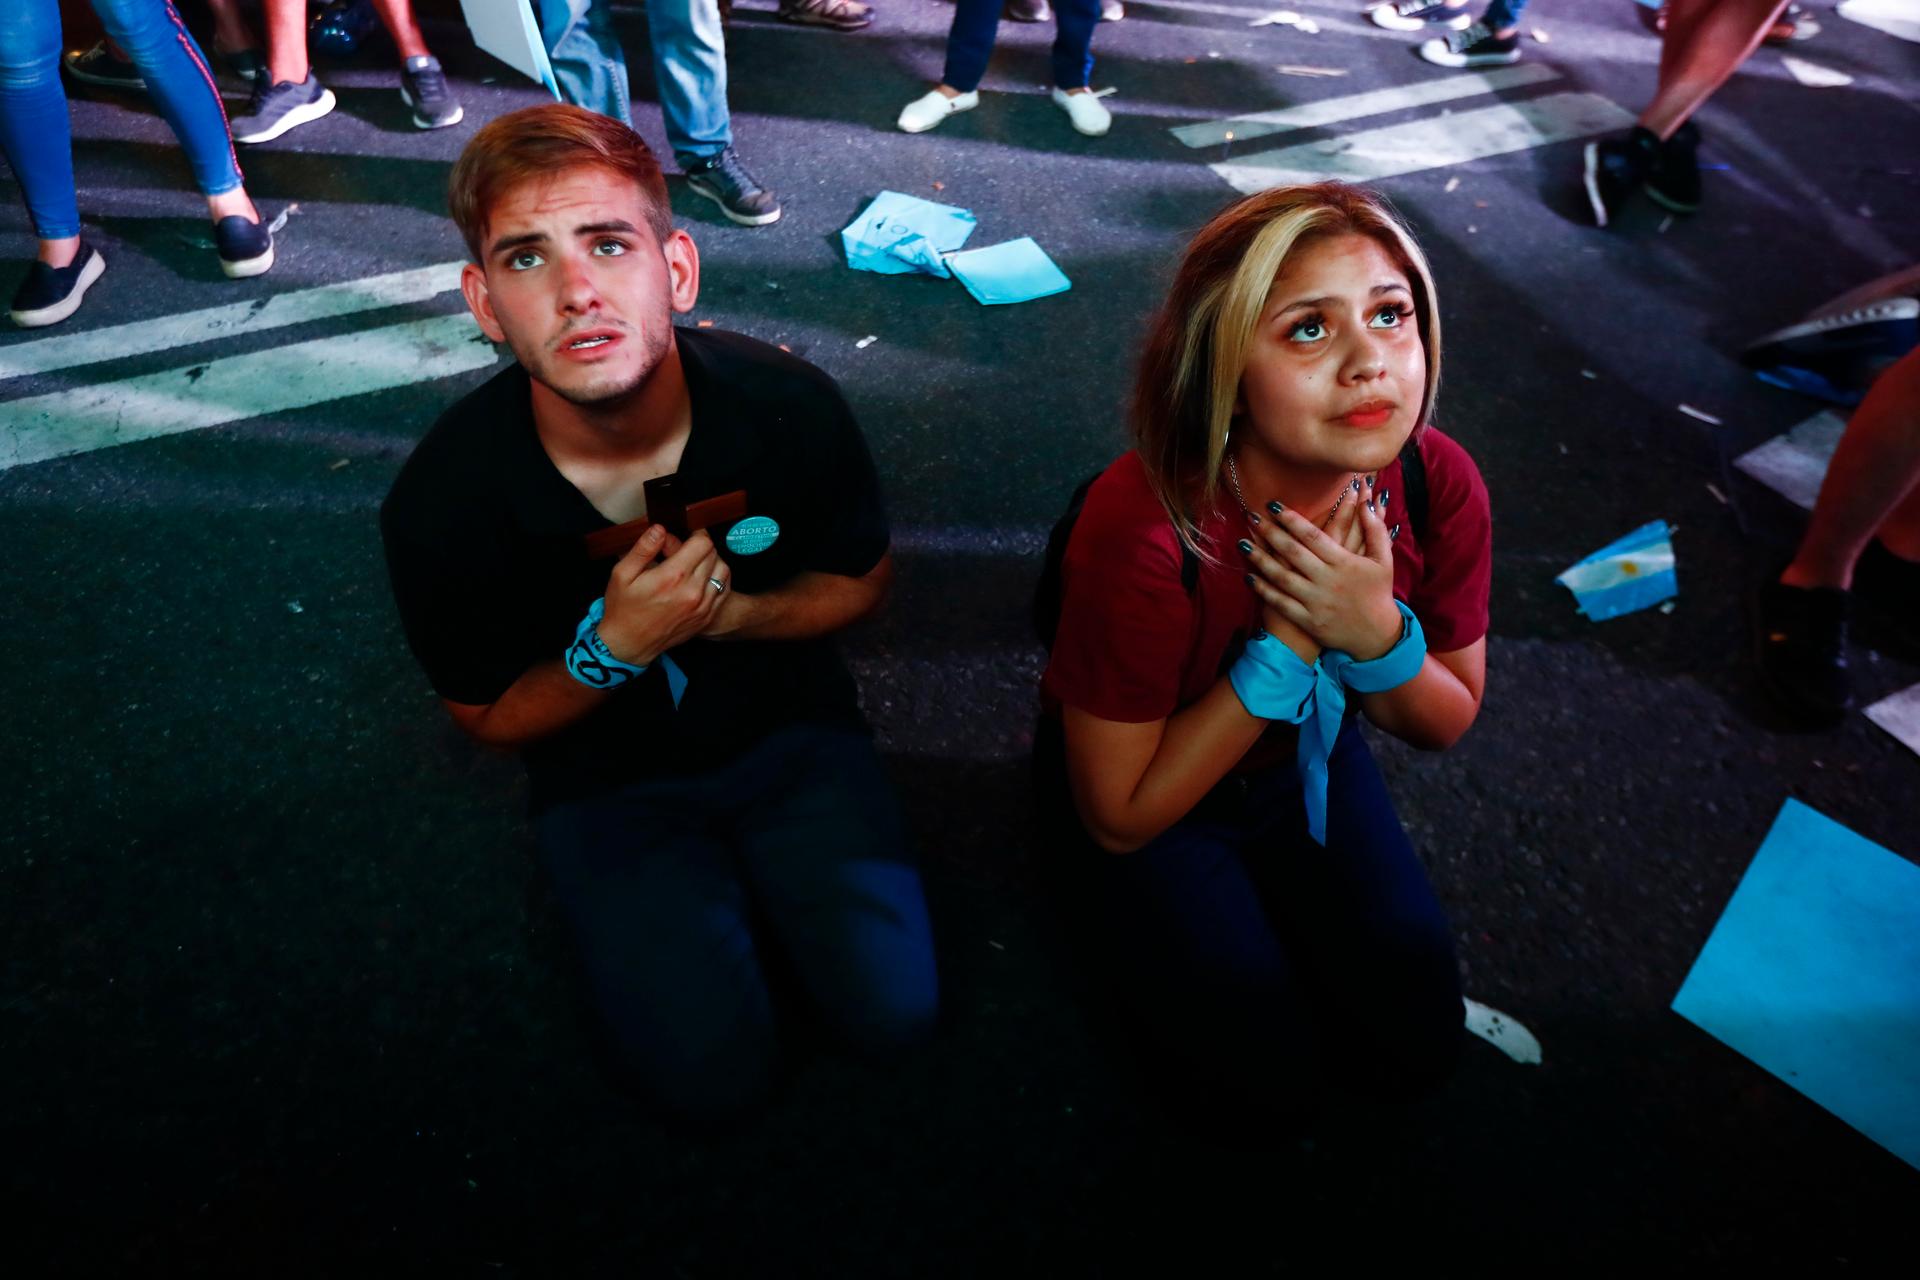 A young man and a young woman, wearing a blue scarf around their wrist, kneel down to pray on the street.